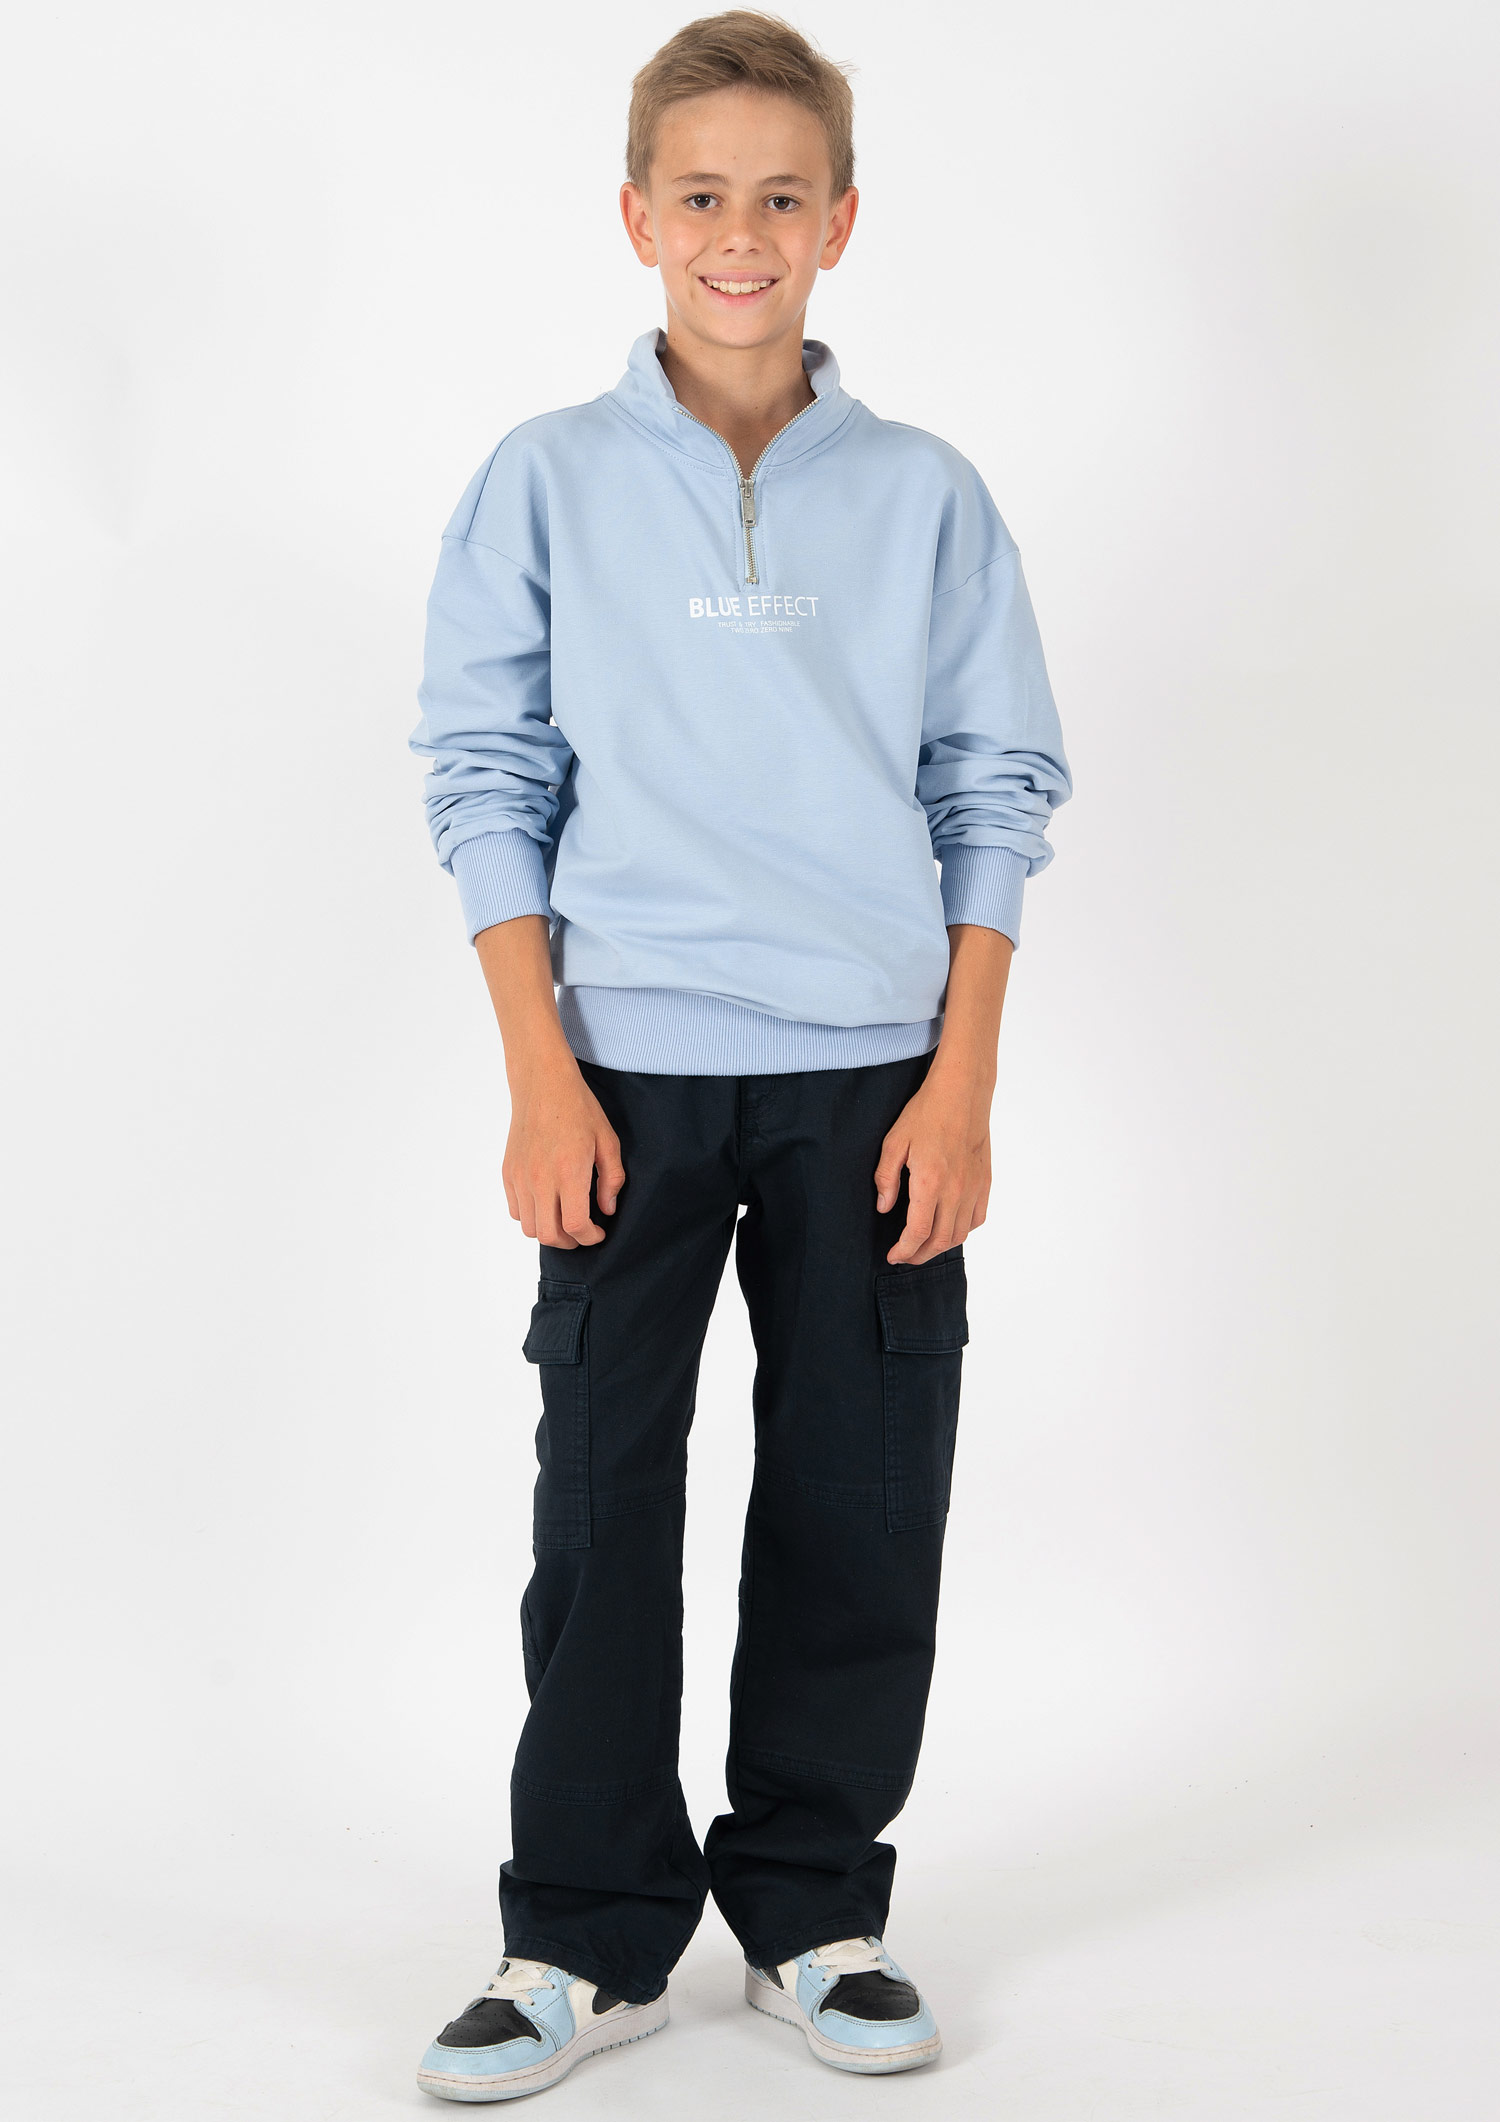 2855-Boys Baggy Cargo Pant available in Slim,Normal